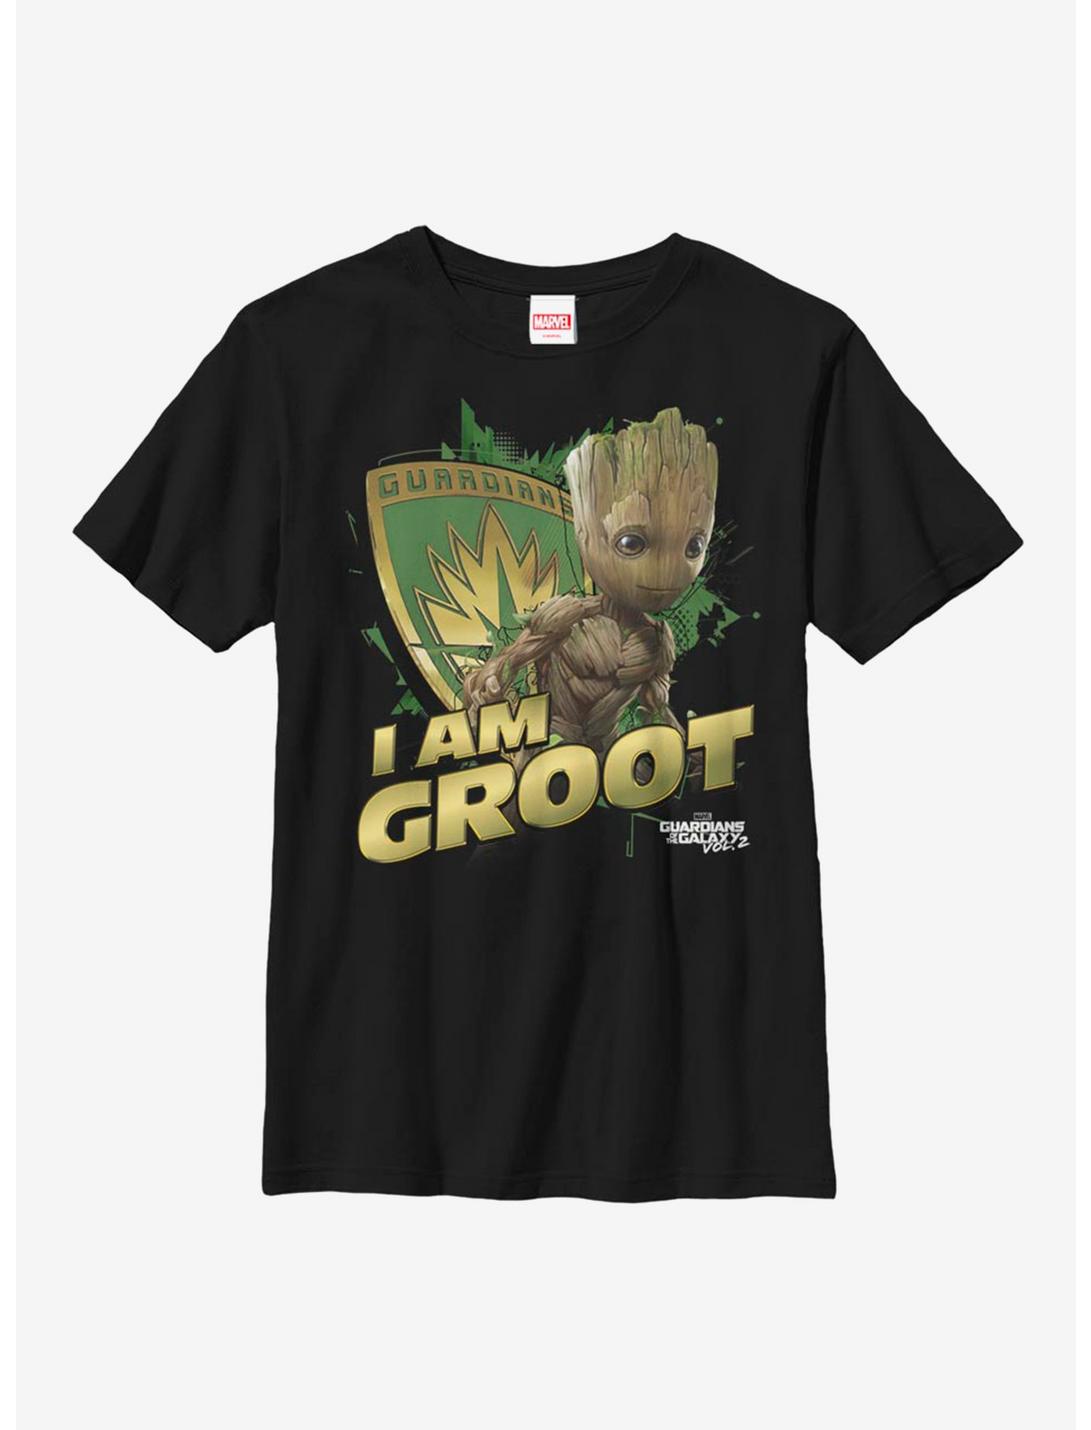 Marvel Guardians Of The Galaxy Groot Slam Youth T-Shirt, BLACK, hi-res